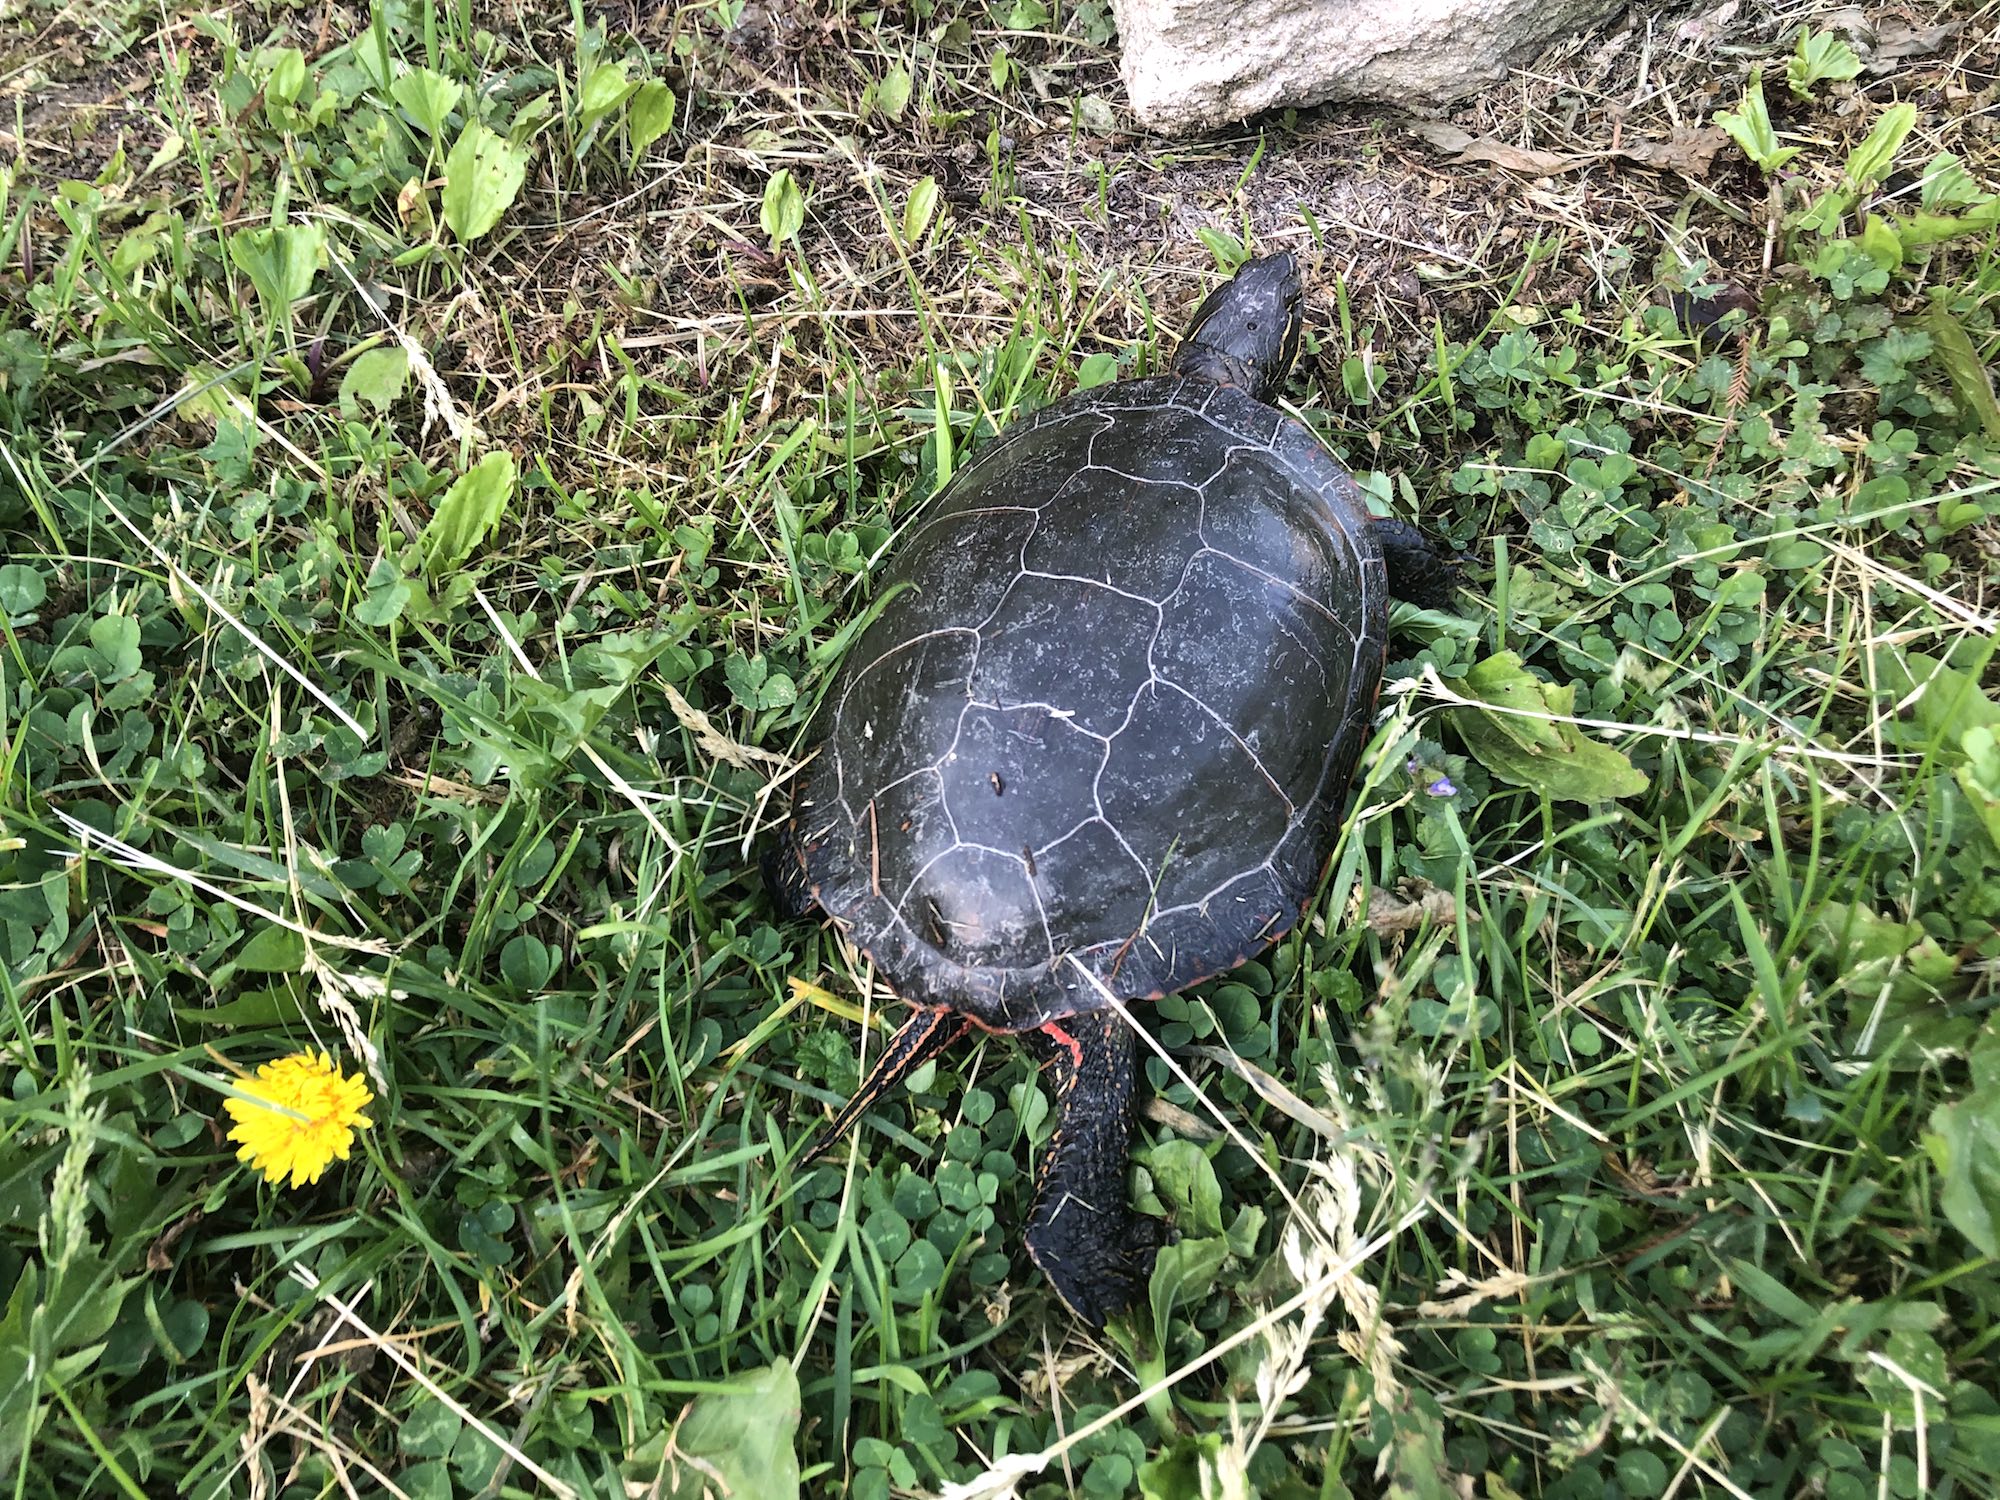 Painted Turtle in E. Ray Stevens Pond and Aquatic Gardens on corner of Manitou Way and Nakoma Road on June 2, 2020.